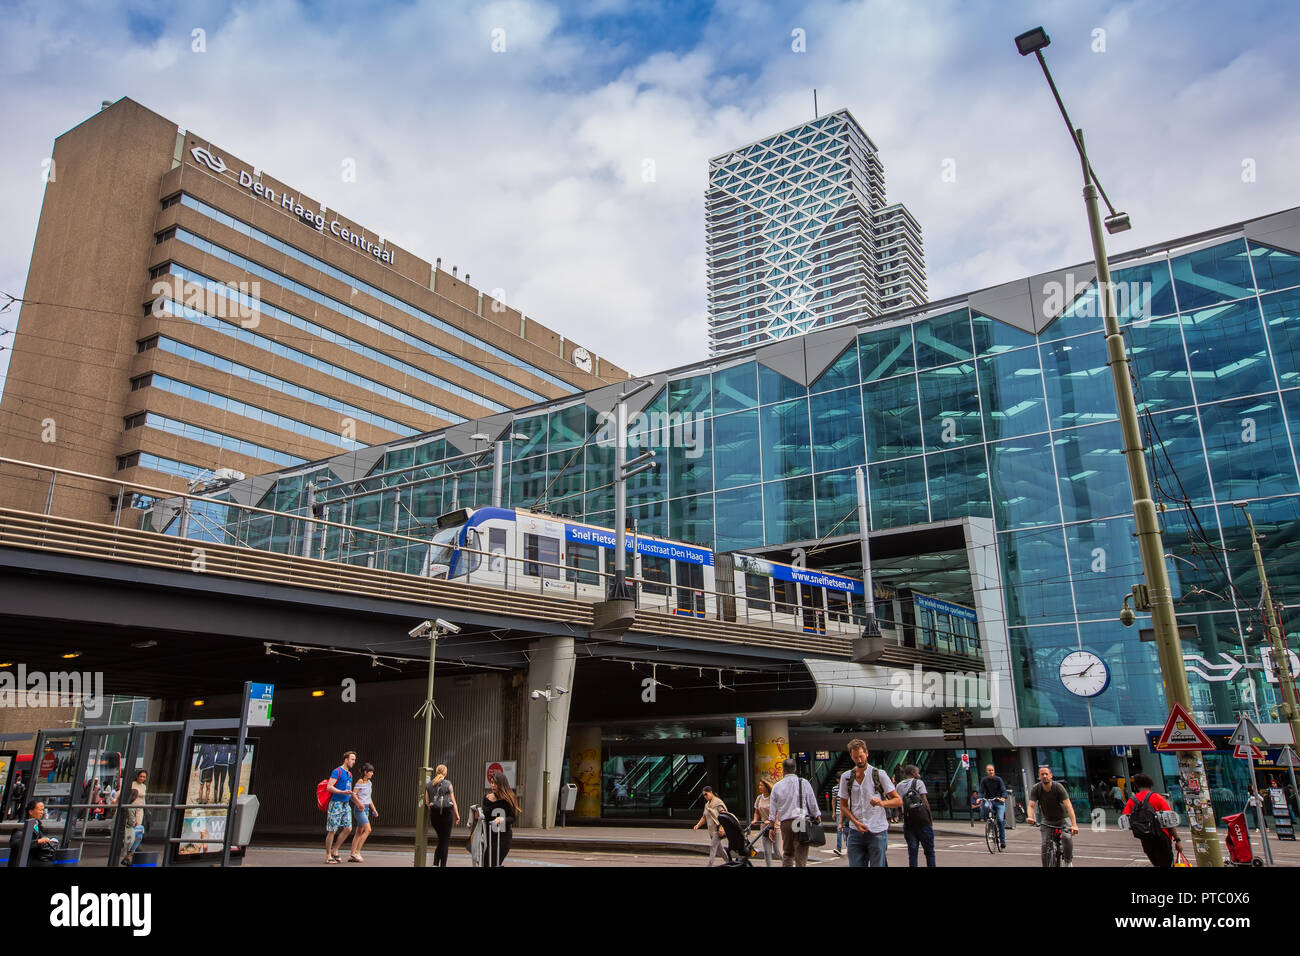 Hague, Netherlands - July 6, 2018: randstadRail light rail tram travelling from The Hague Central Station through city Stock Photo